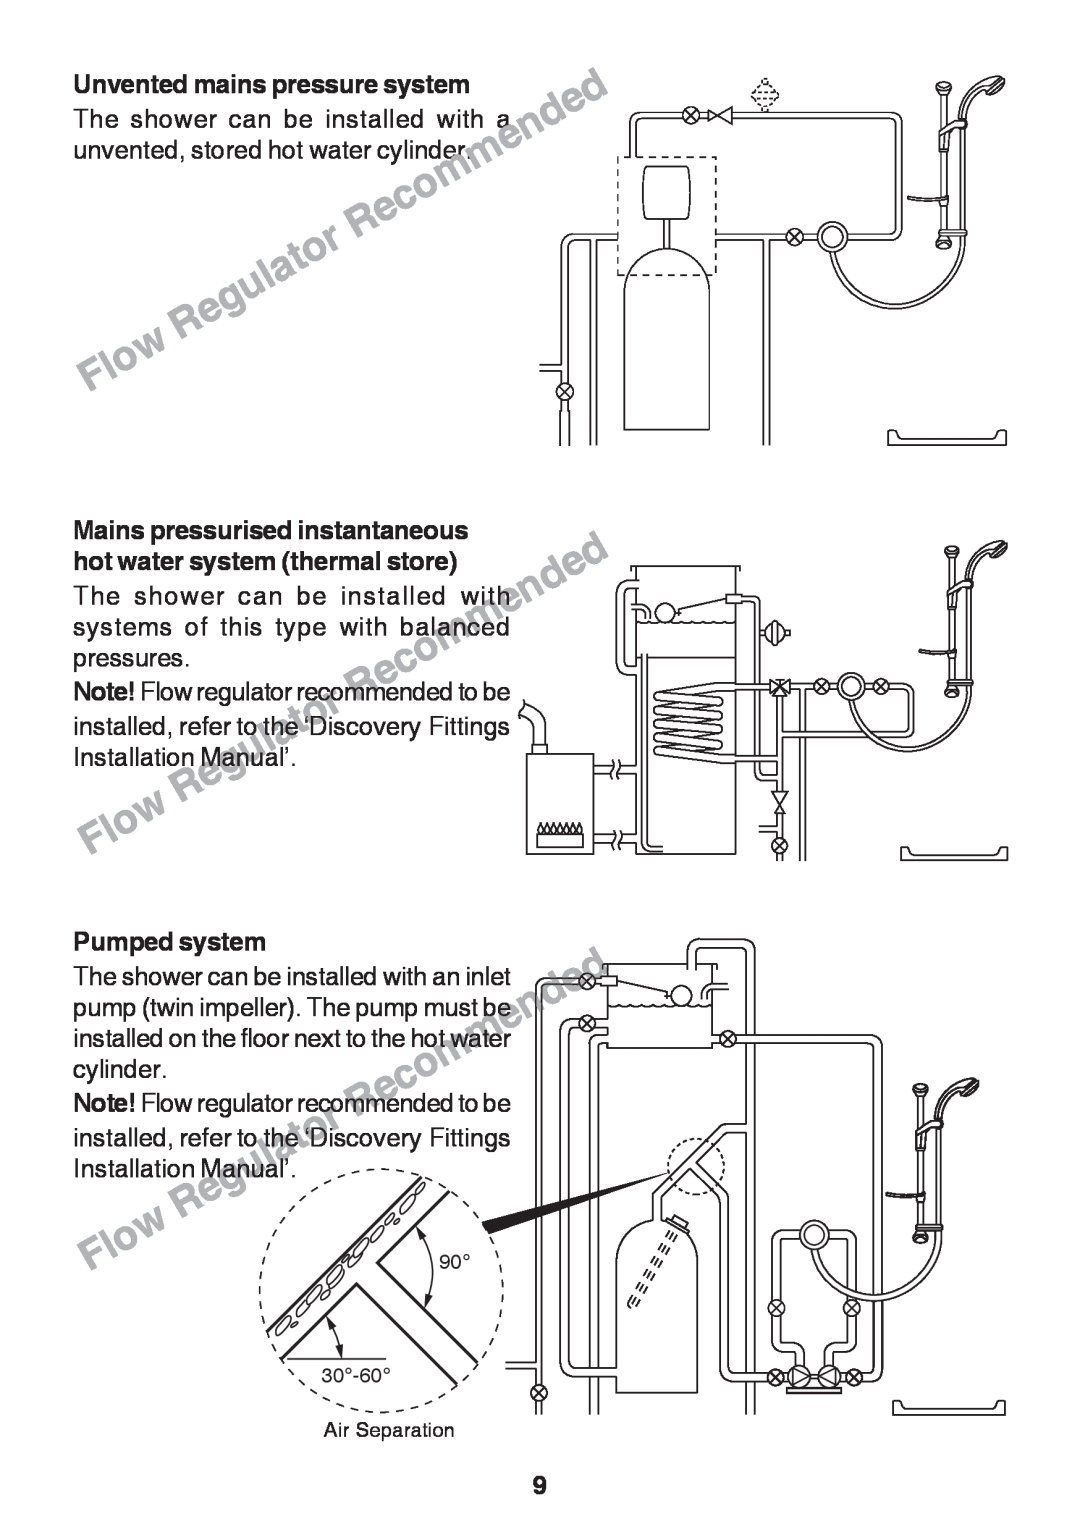 Kohler Discovery manual Mains pressurised instantaneous, hot water system thermal store, Pumped system, Recommended, Flow 